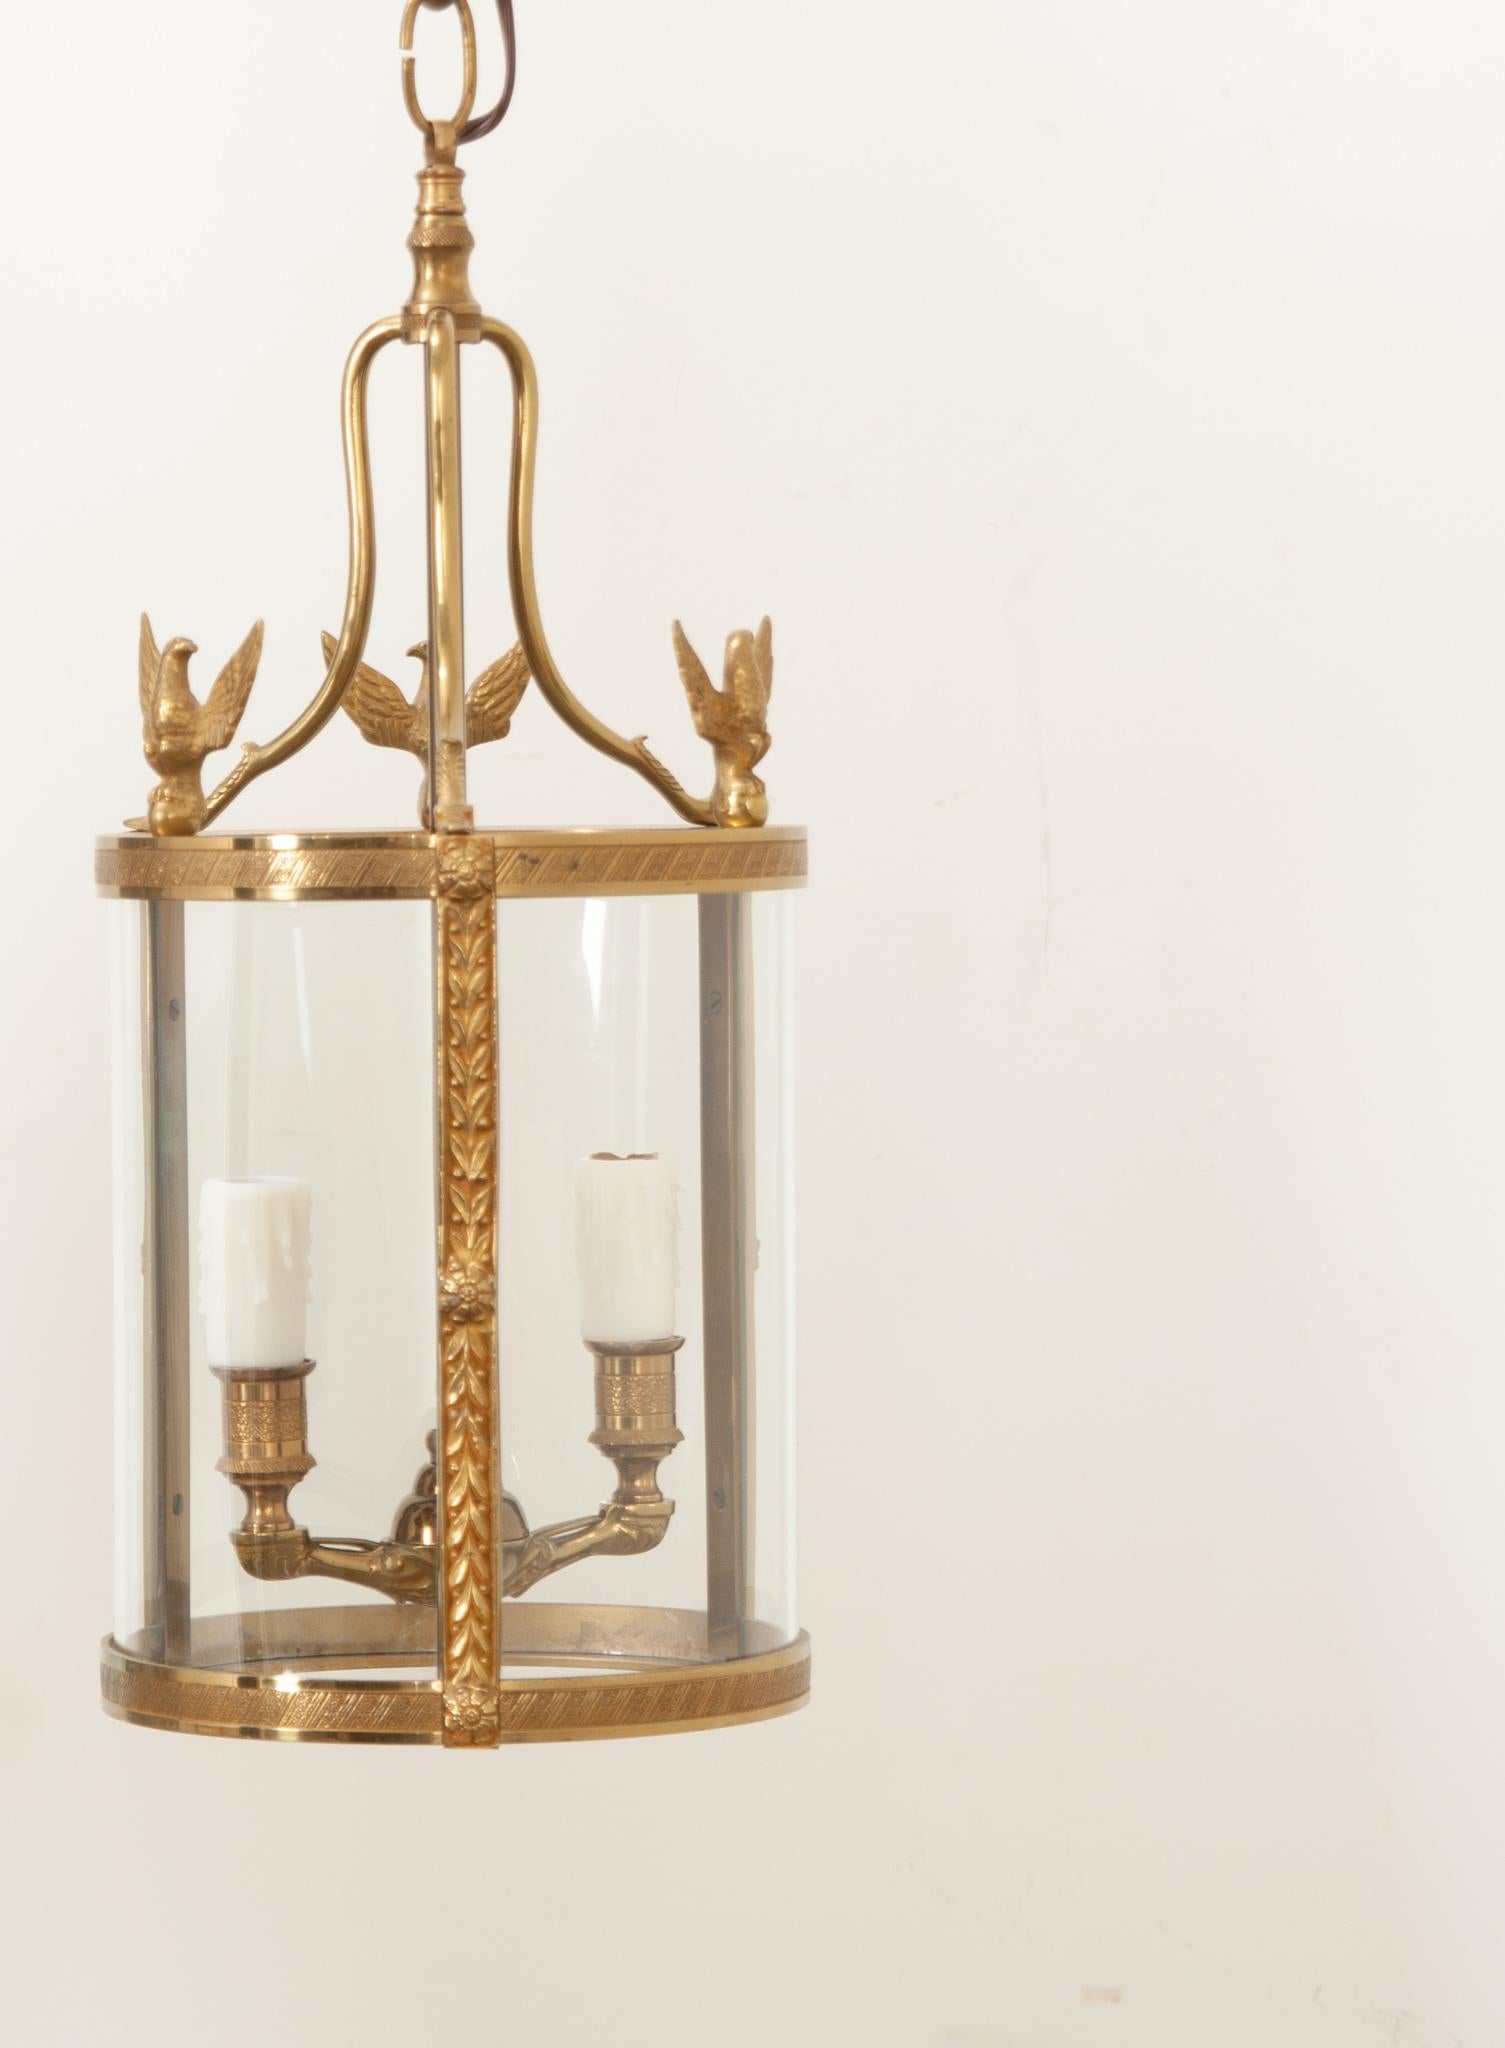 A petite French pair of brass lanterns with curved glass panels. This unique design has eagles at the top of the lanterns with decorative floral trim. Each lantern has two candle arms. Recently cleaned and rewired for the US using UL-listed parts,